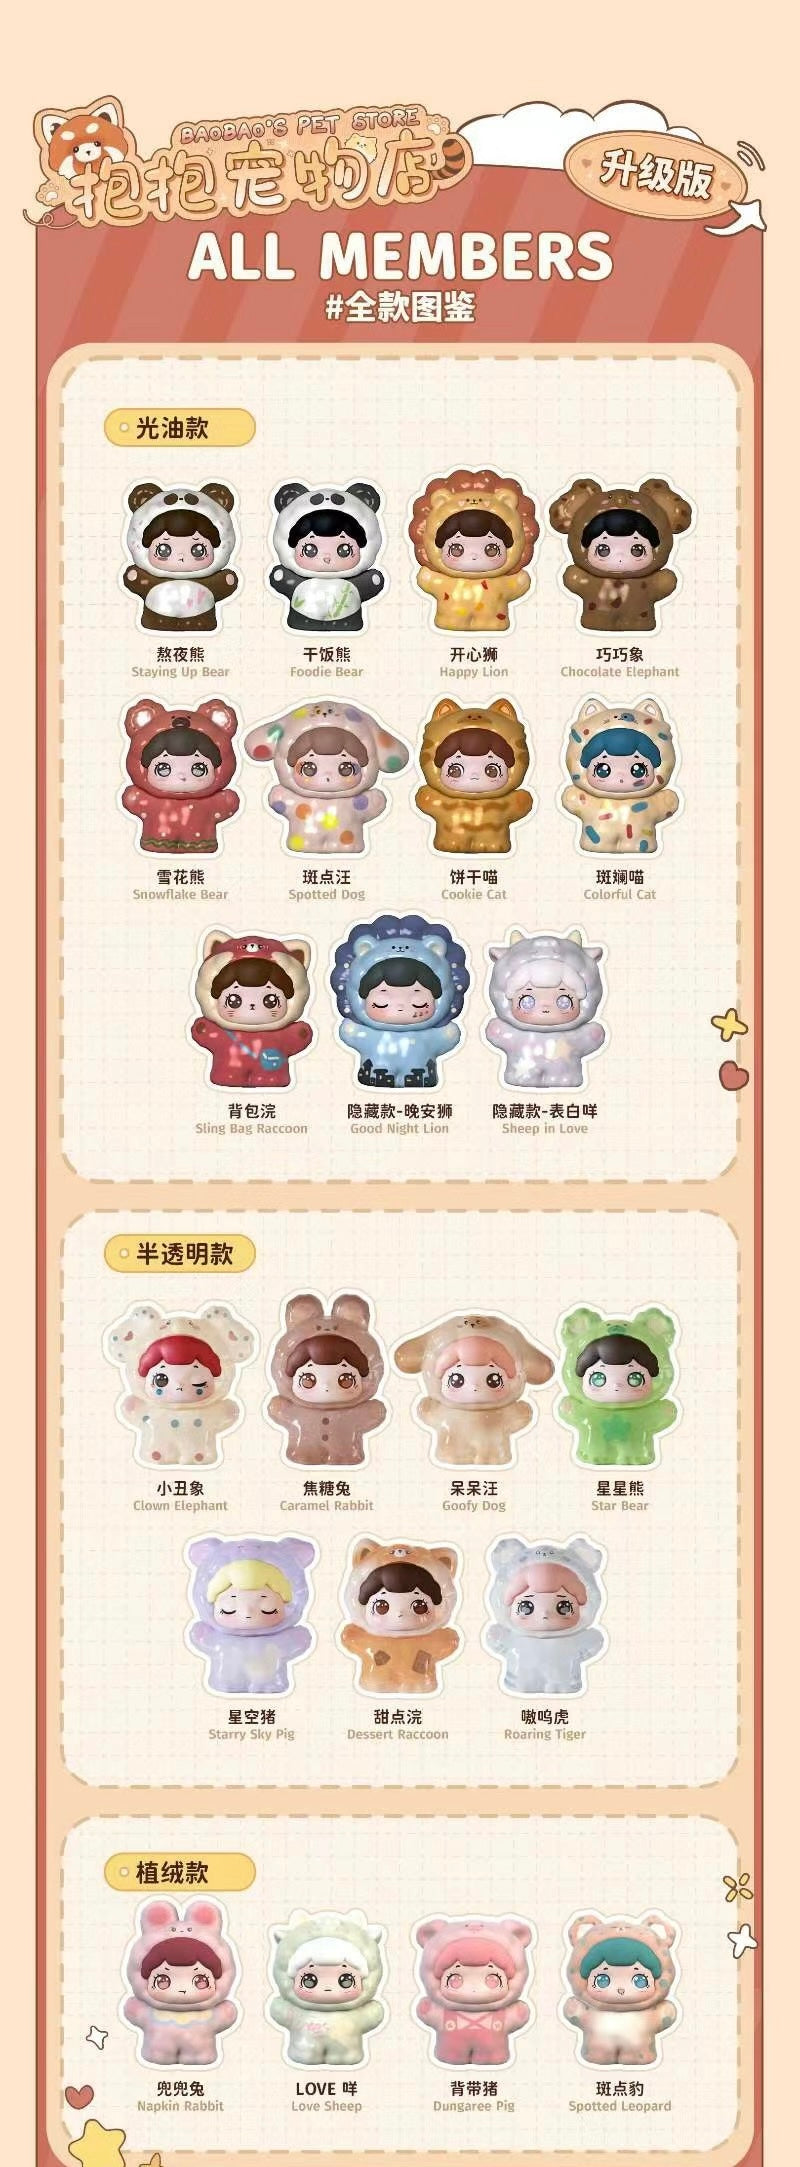 Baobao’s Pet Store Updated Version Mini Bean,Shiny/Clear/Fuzzy